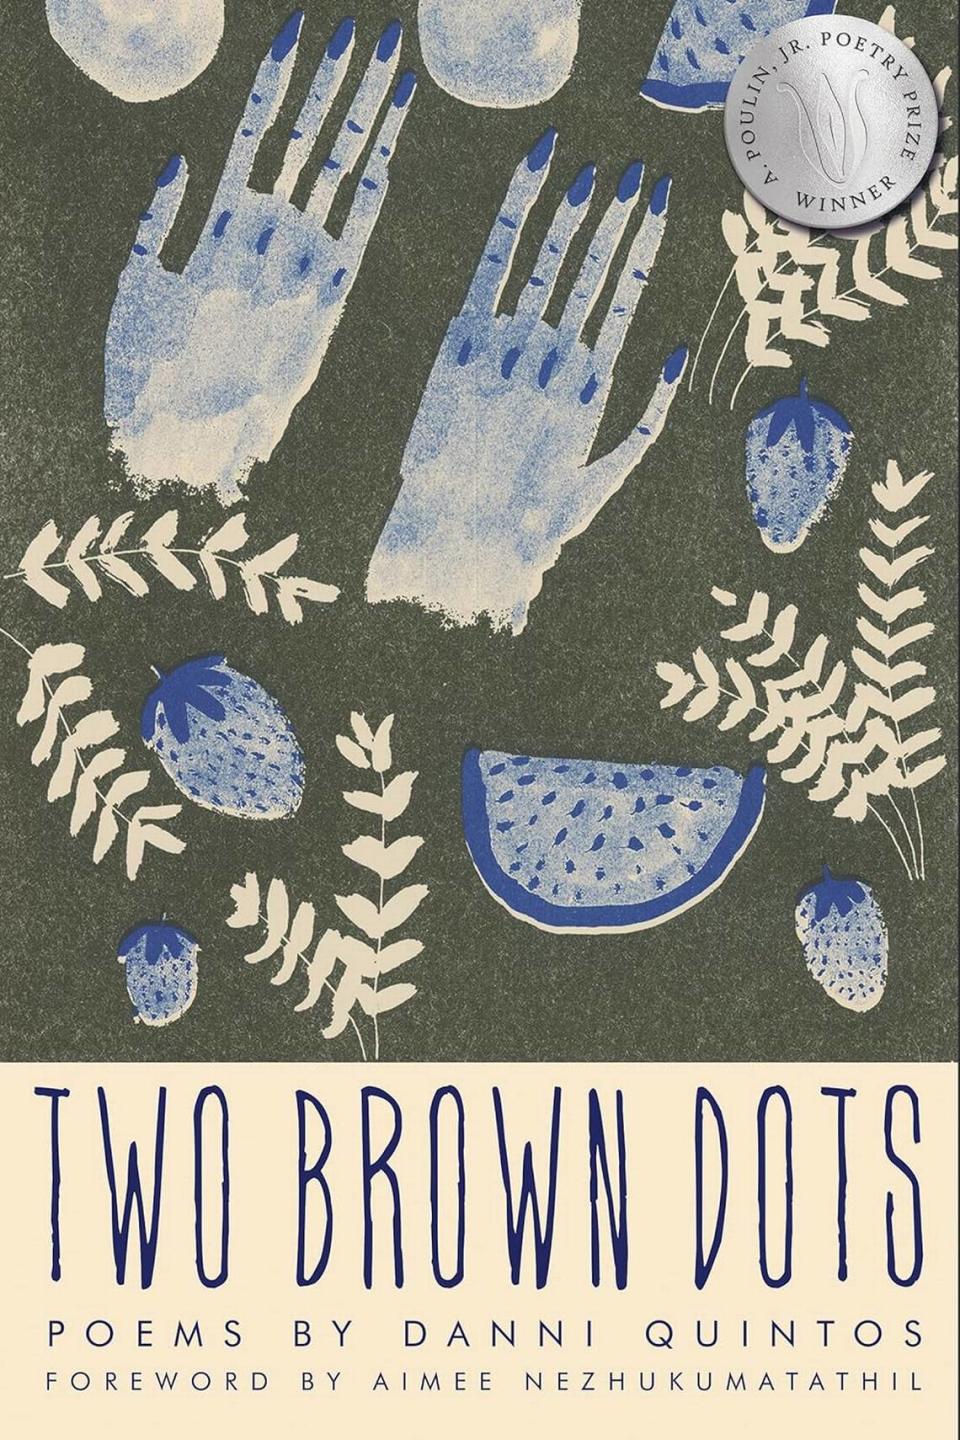 “Two Brown Dots” is Danni Quintos’ debut book poetry.